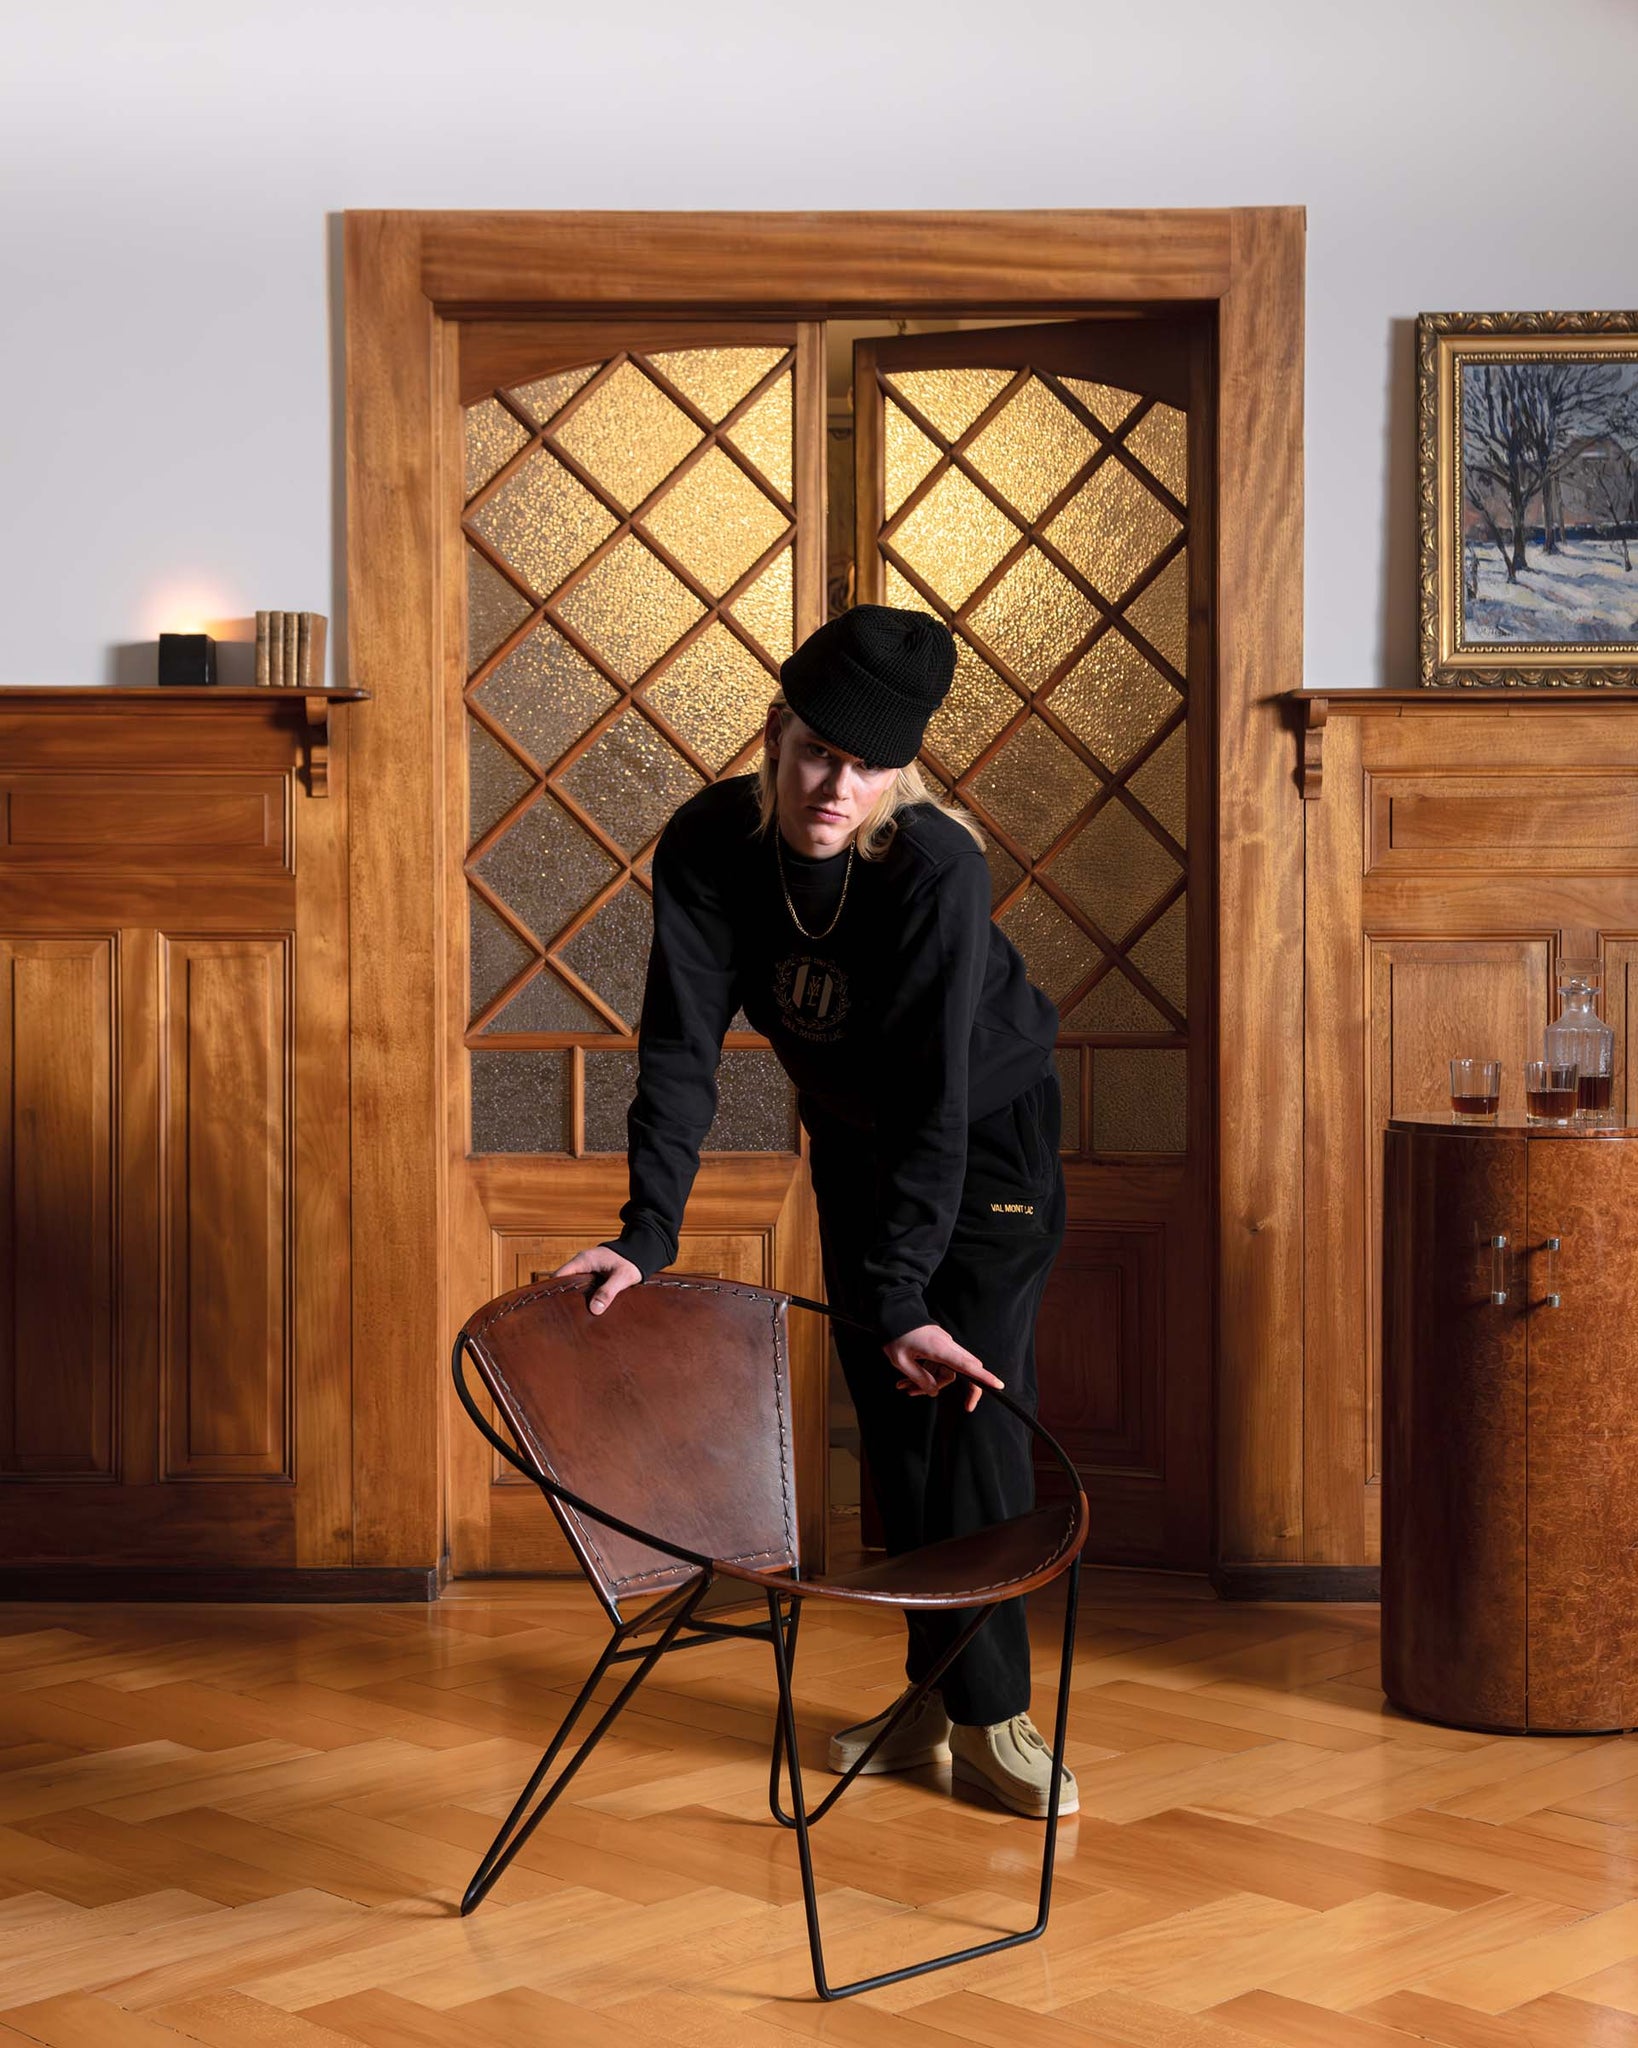 Woman wearing a Val Mont Lac clothing outfit leaning on a vintage designer chair in a Swiss chalet